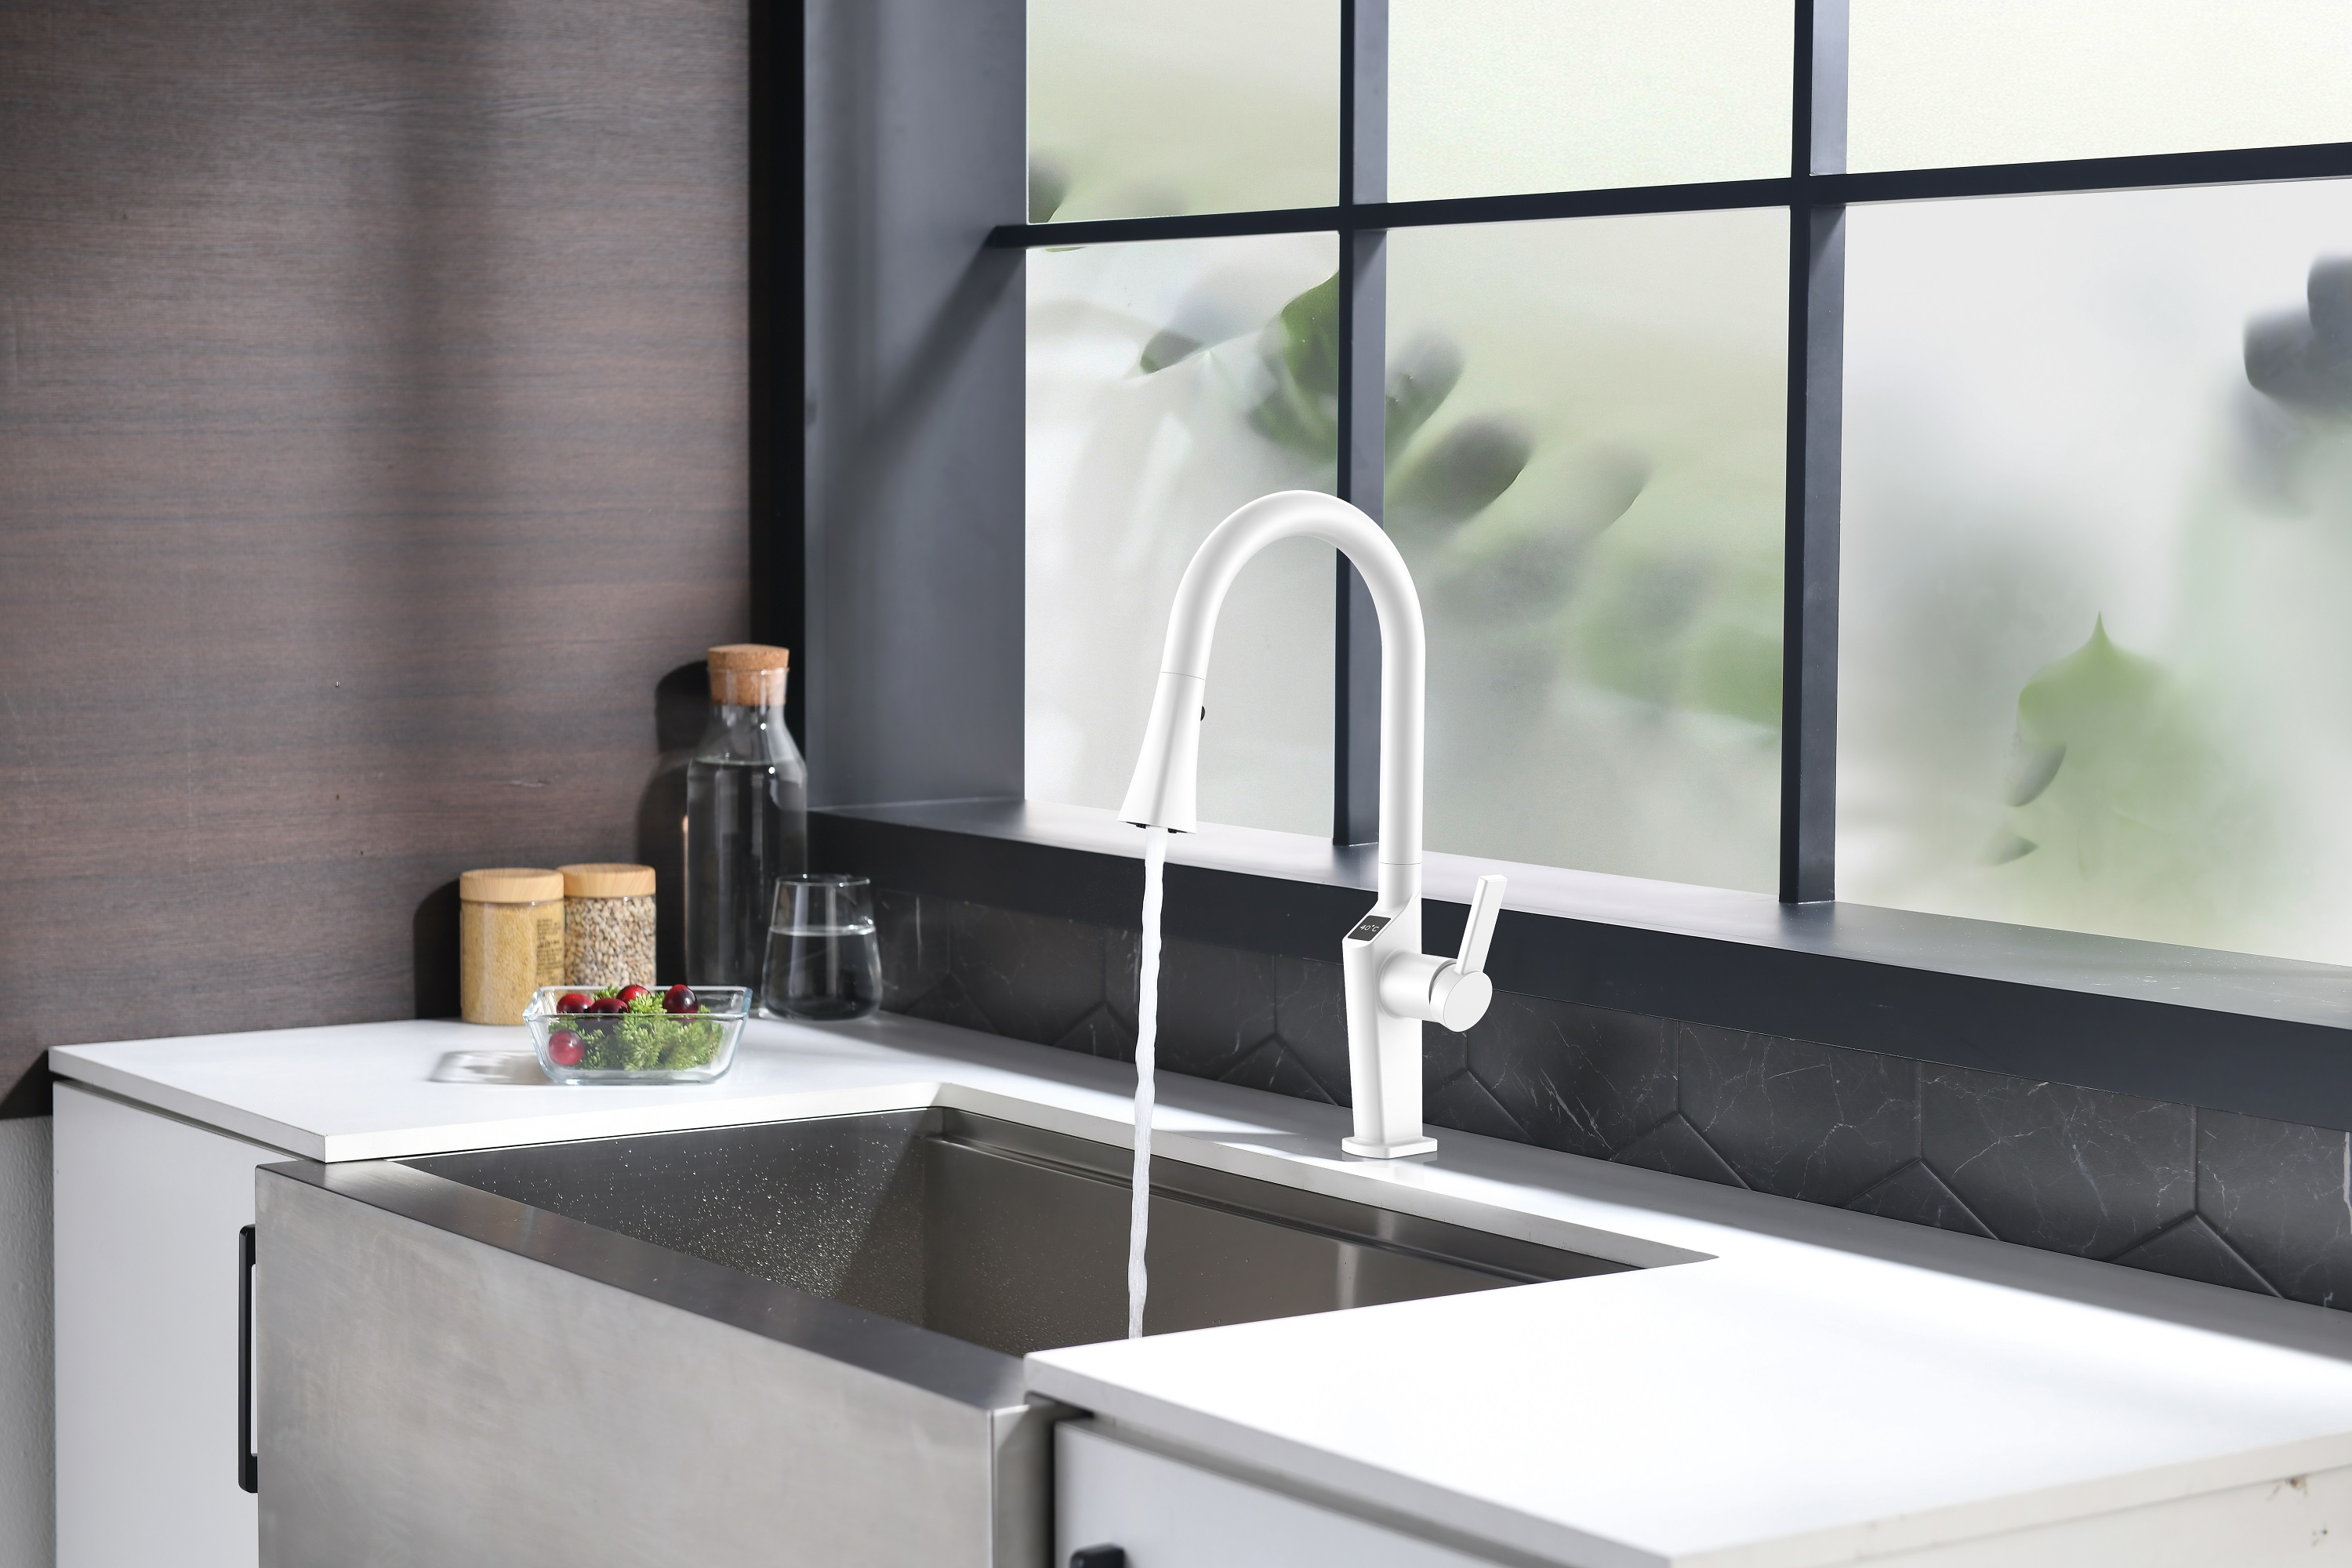 Temperature Display Pull Down Kitchen Faucet Matte White Kitchen Faucet with Brush